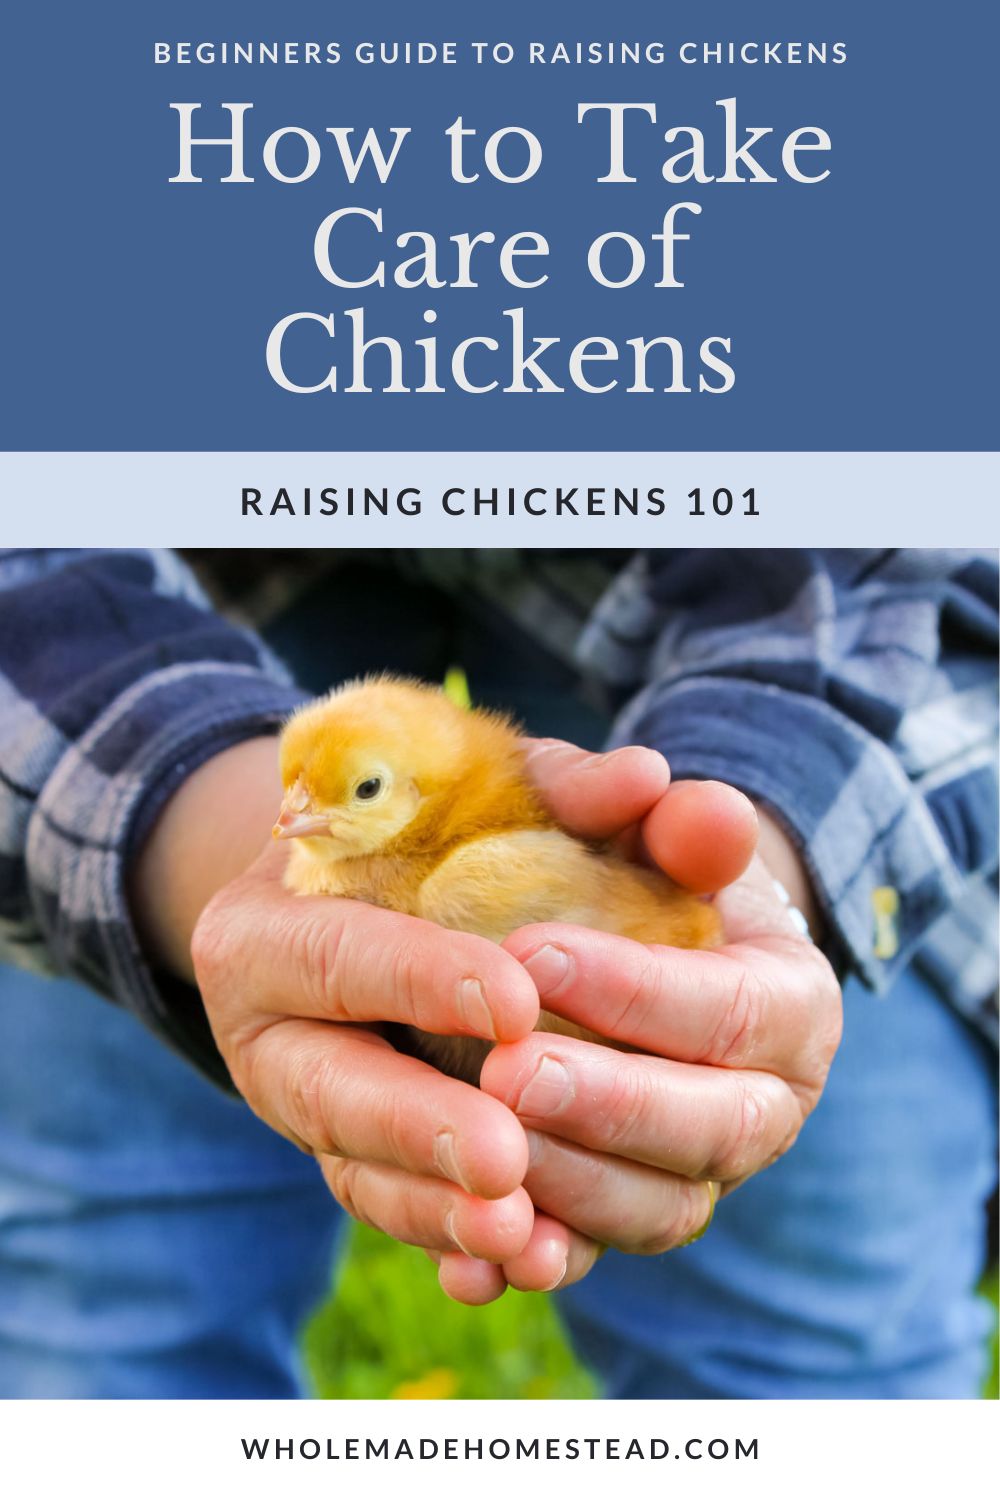 a woman's hands are holding a baby chick